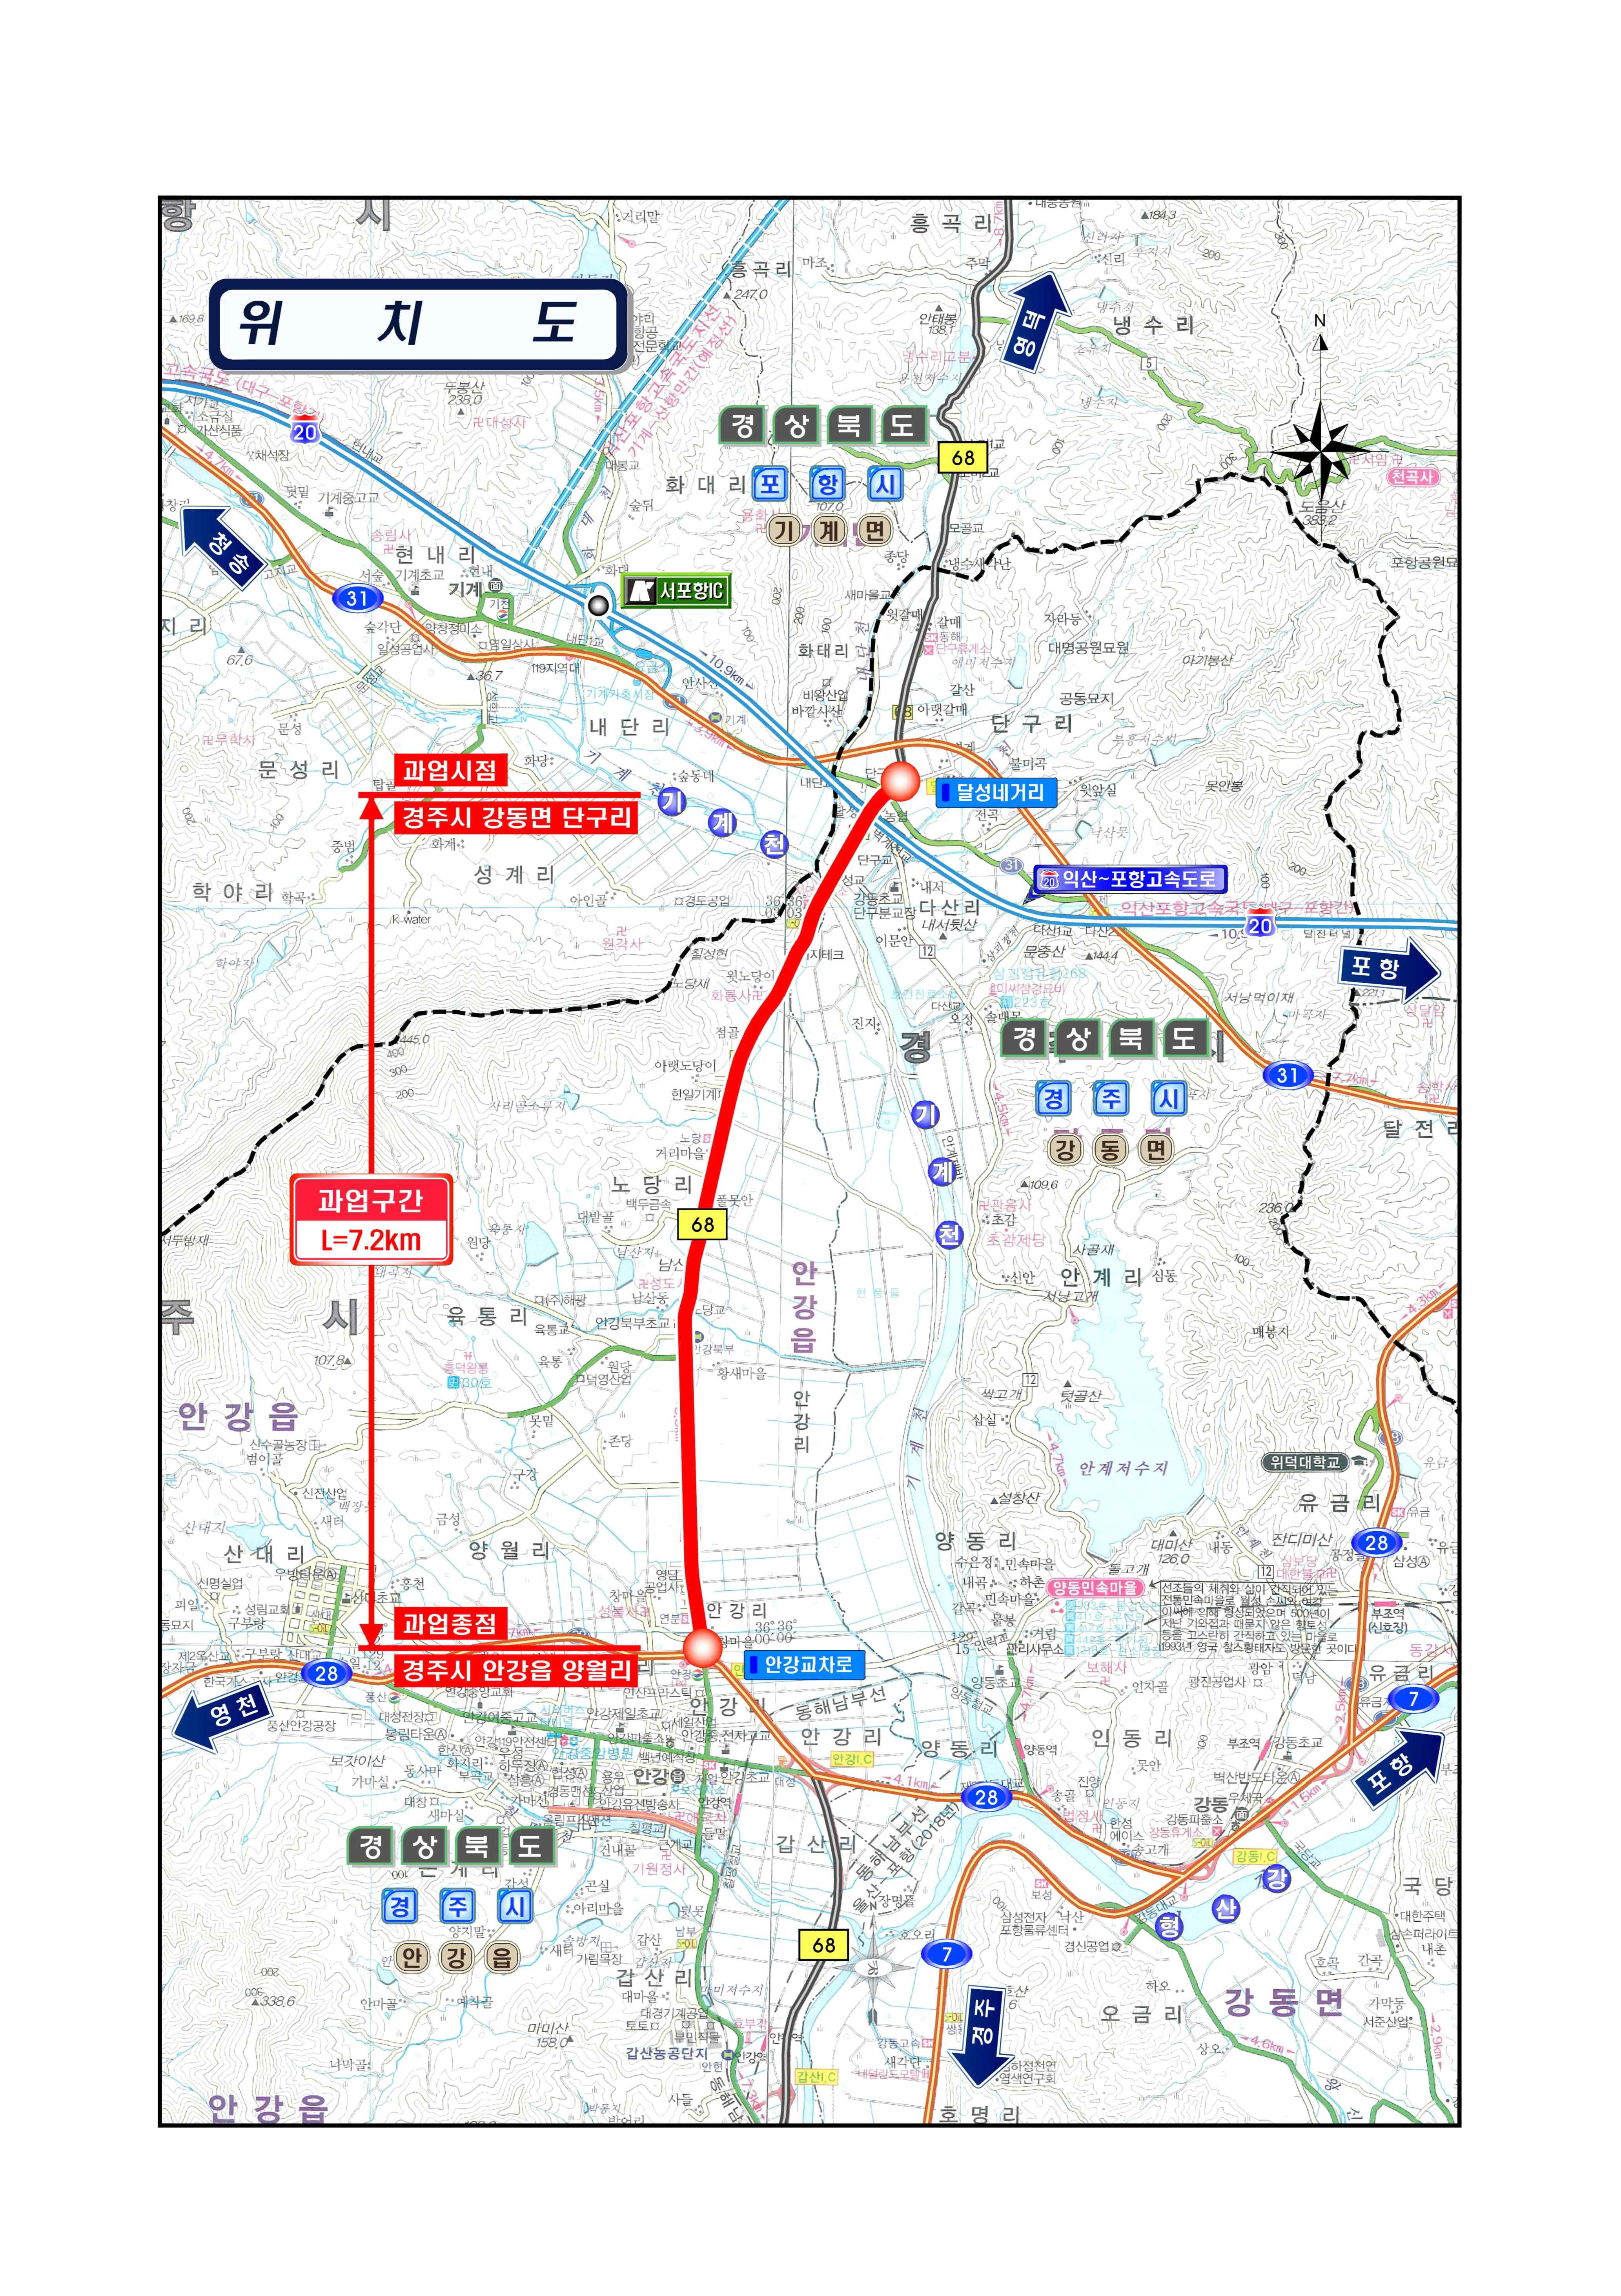 Preliminary and detailed engineering design for the Gyeongju Gangdong-Angang construction project on state-supported local road No. 68